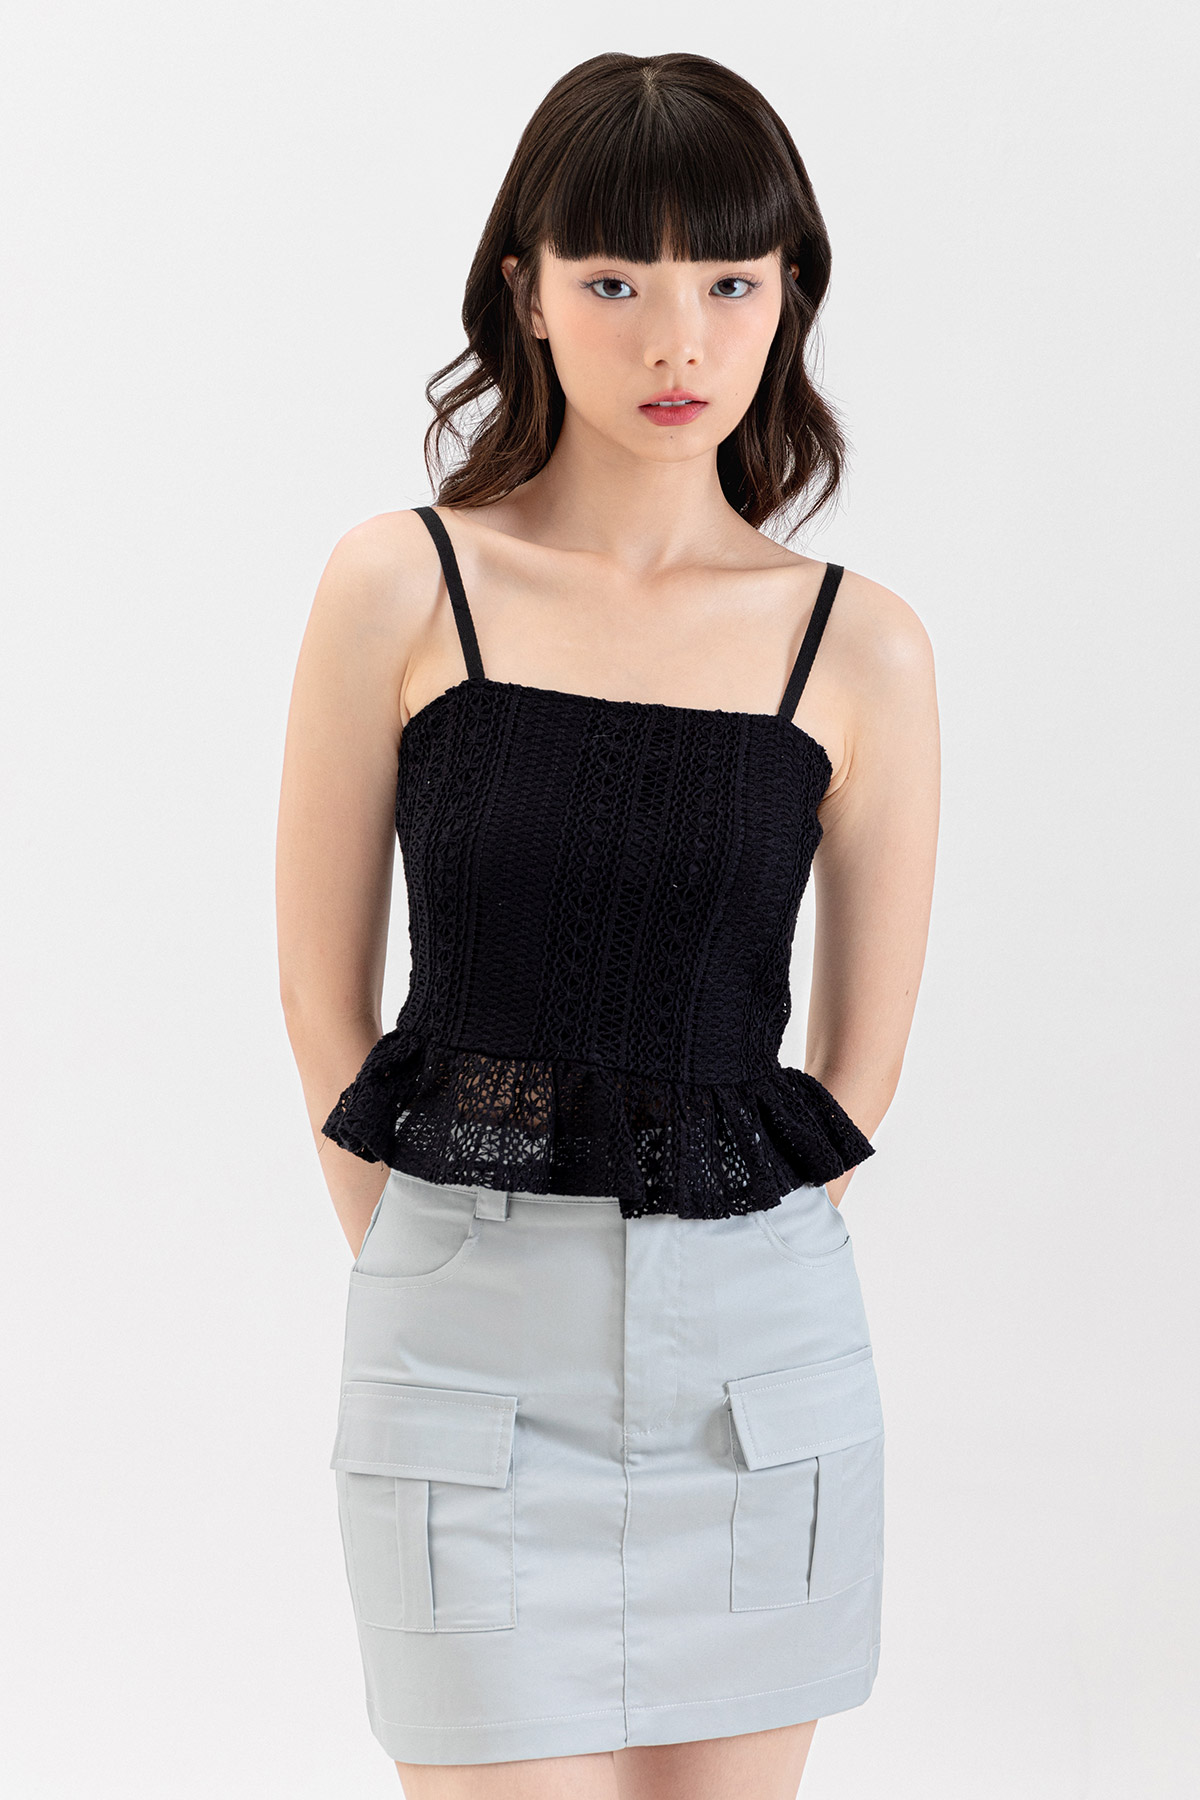 *SALE* PIA TOP - MIDNIGHT JACK [BY MODPARADE]